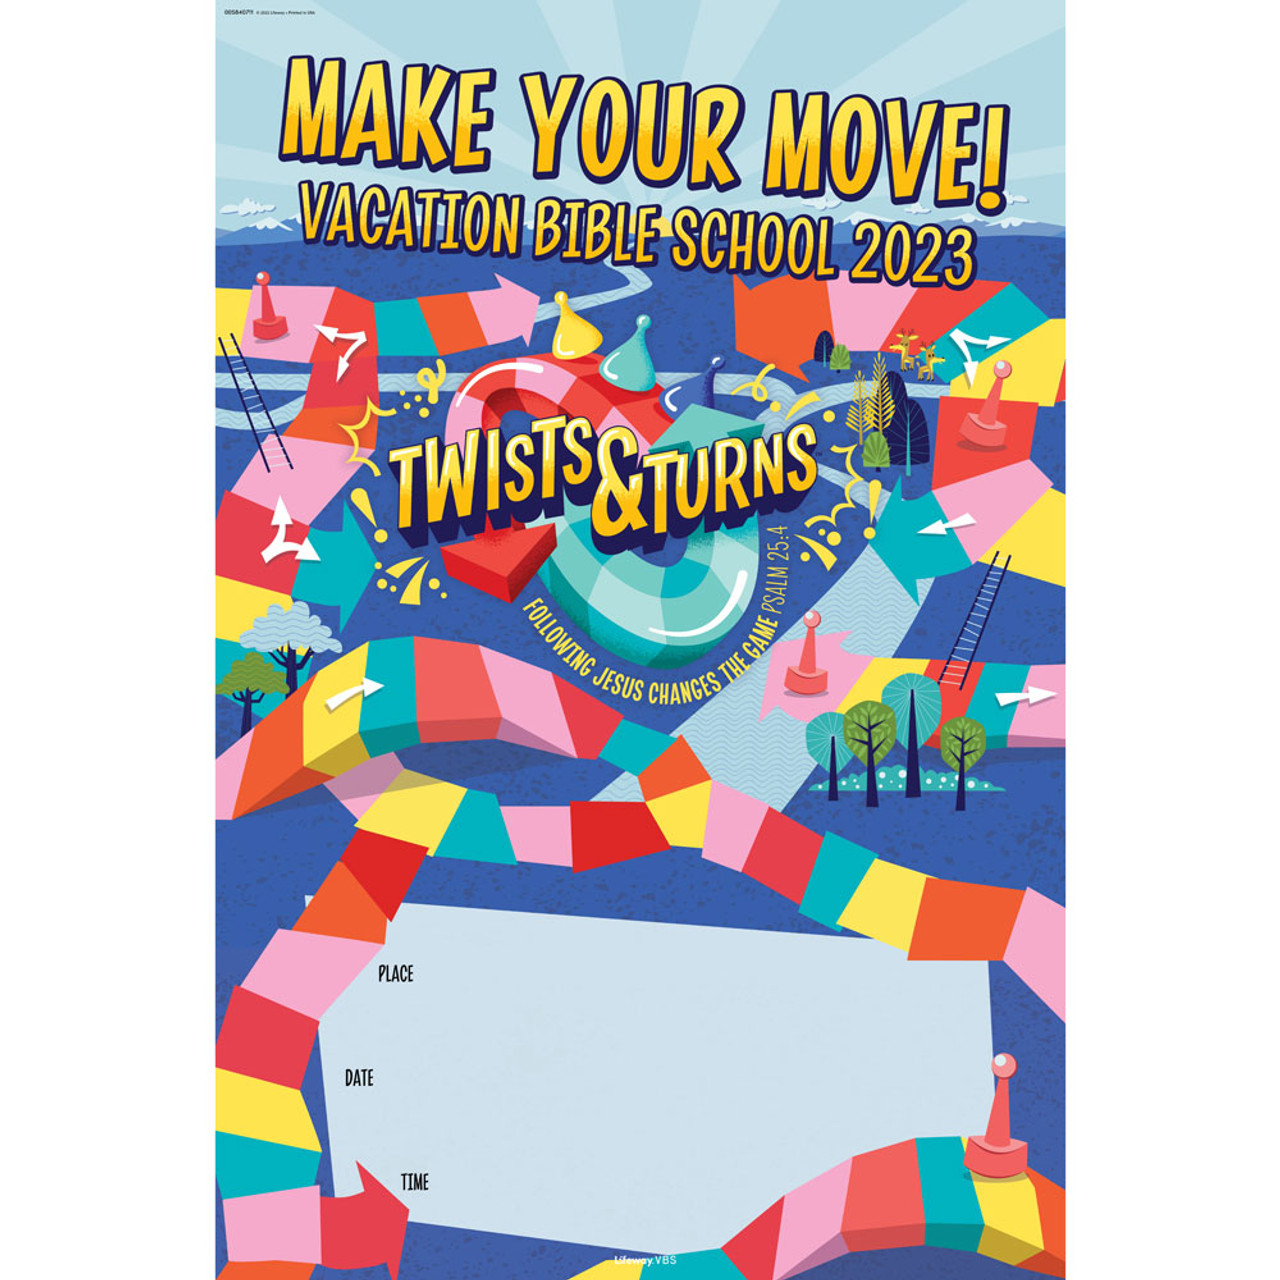 Promotional Poster Twists & Turns VBS 2023 by Lifeway